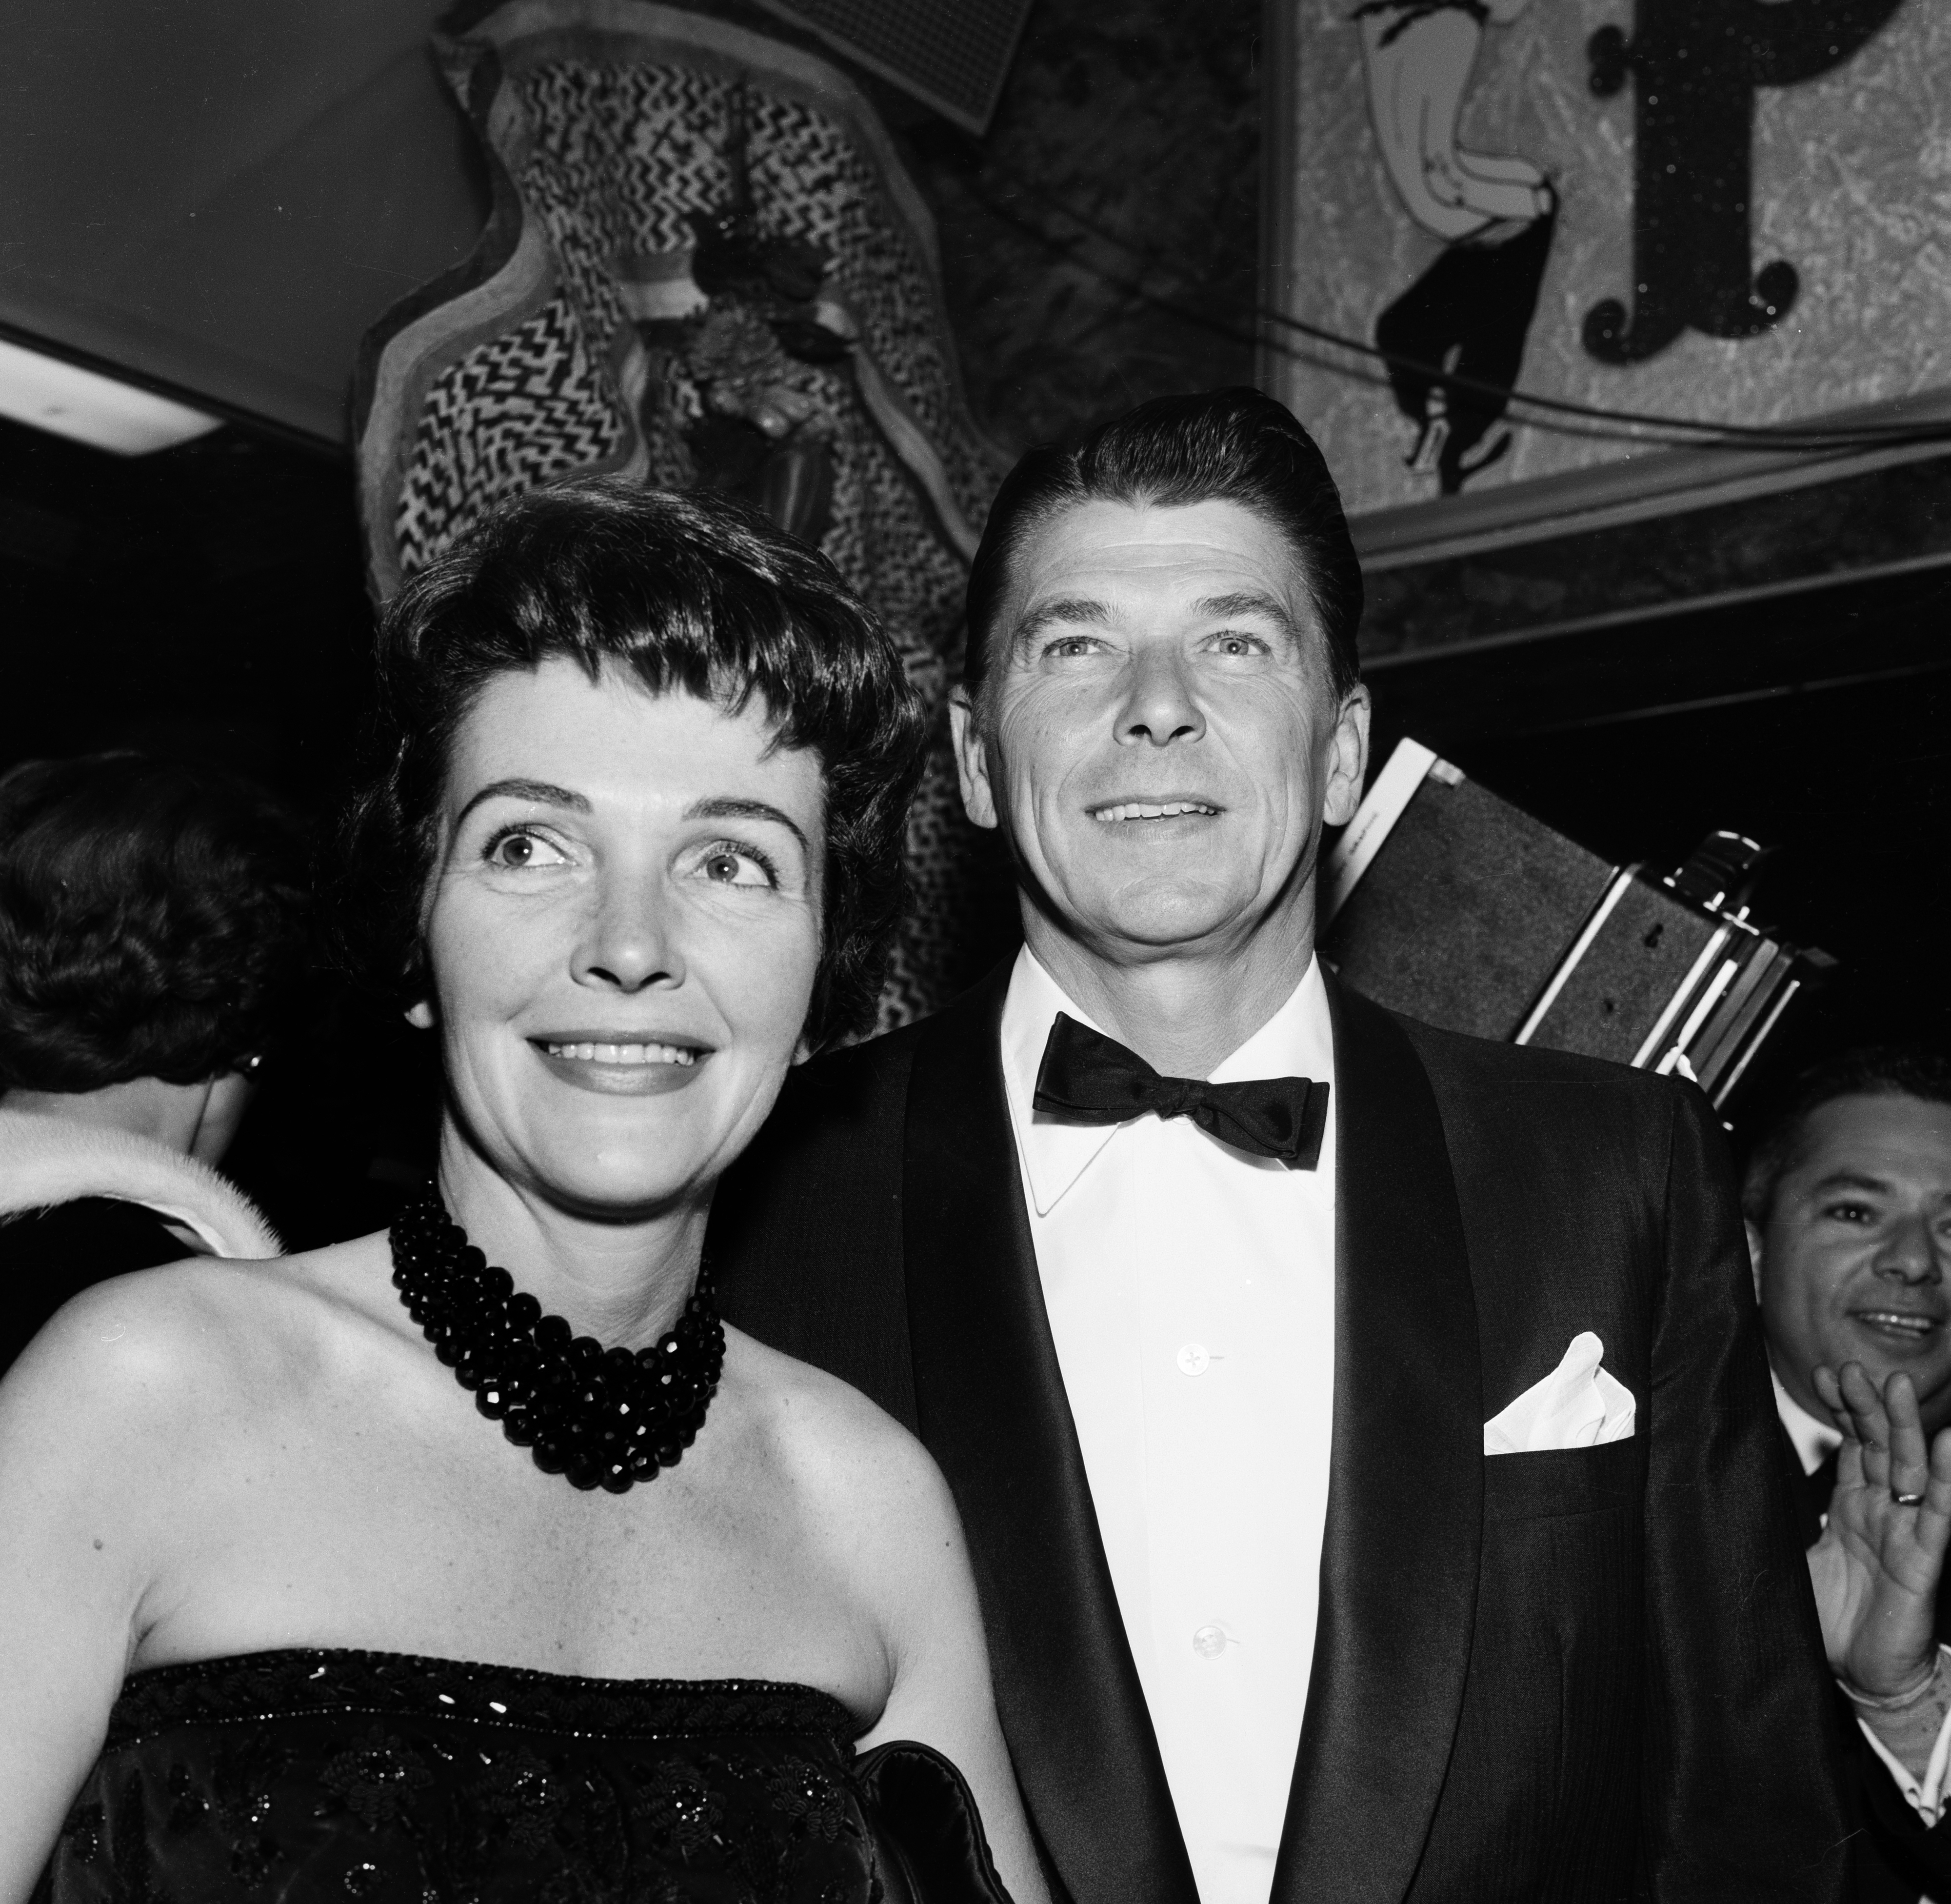 Two individuals at an event, person on the right in a tuxedo with a bow tie, person on the left in a strapless gown with a necklace